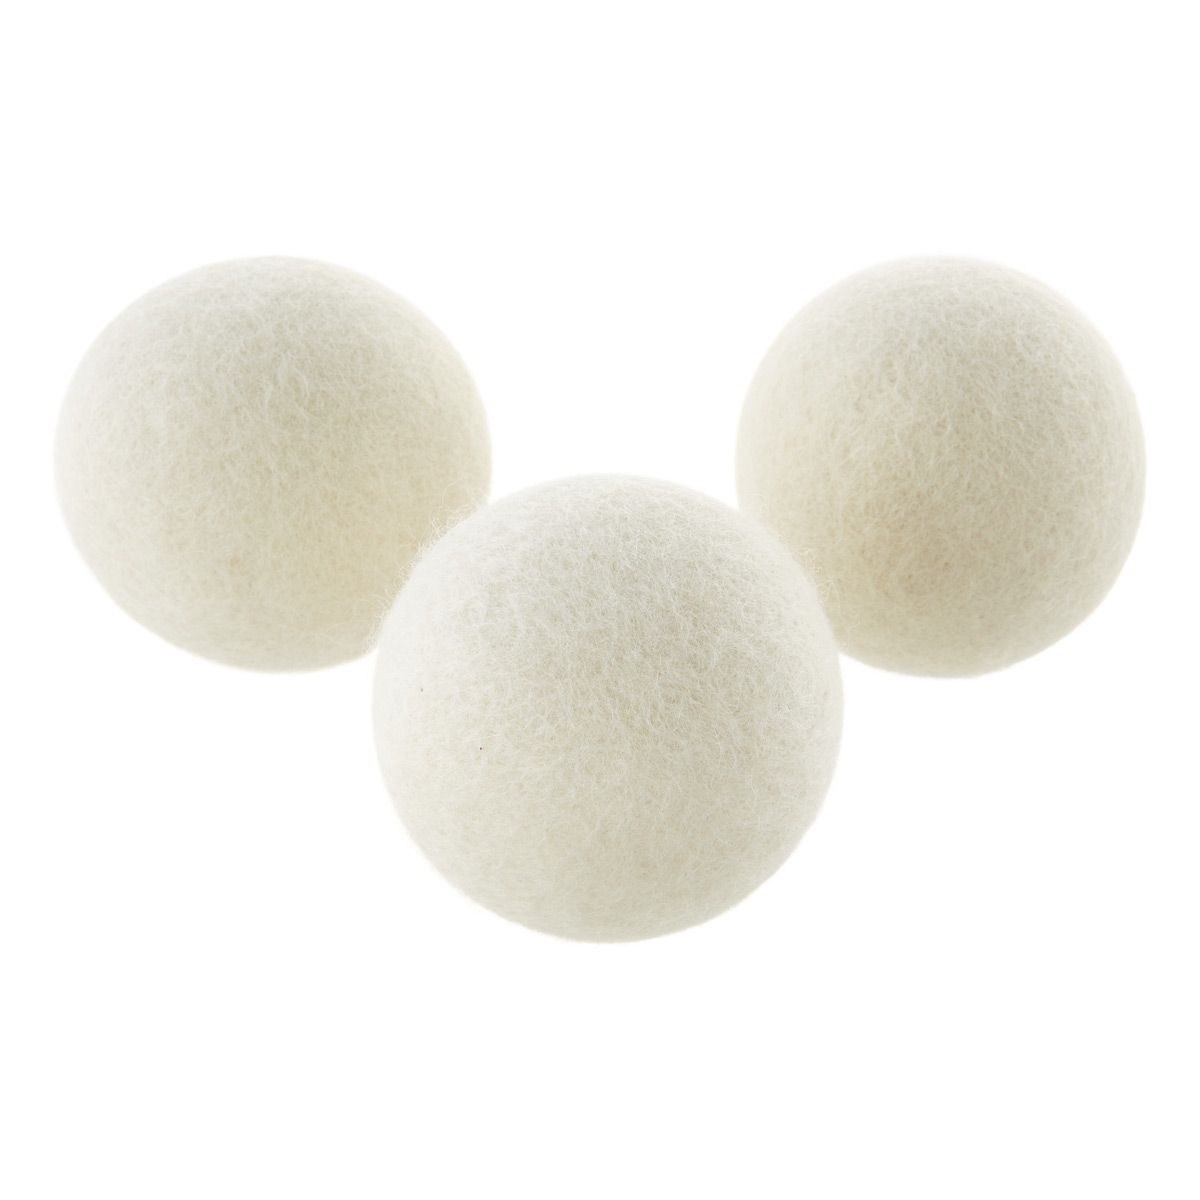 Wool Dryer Balls | The Container Store